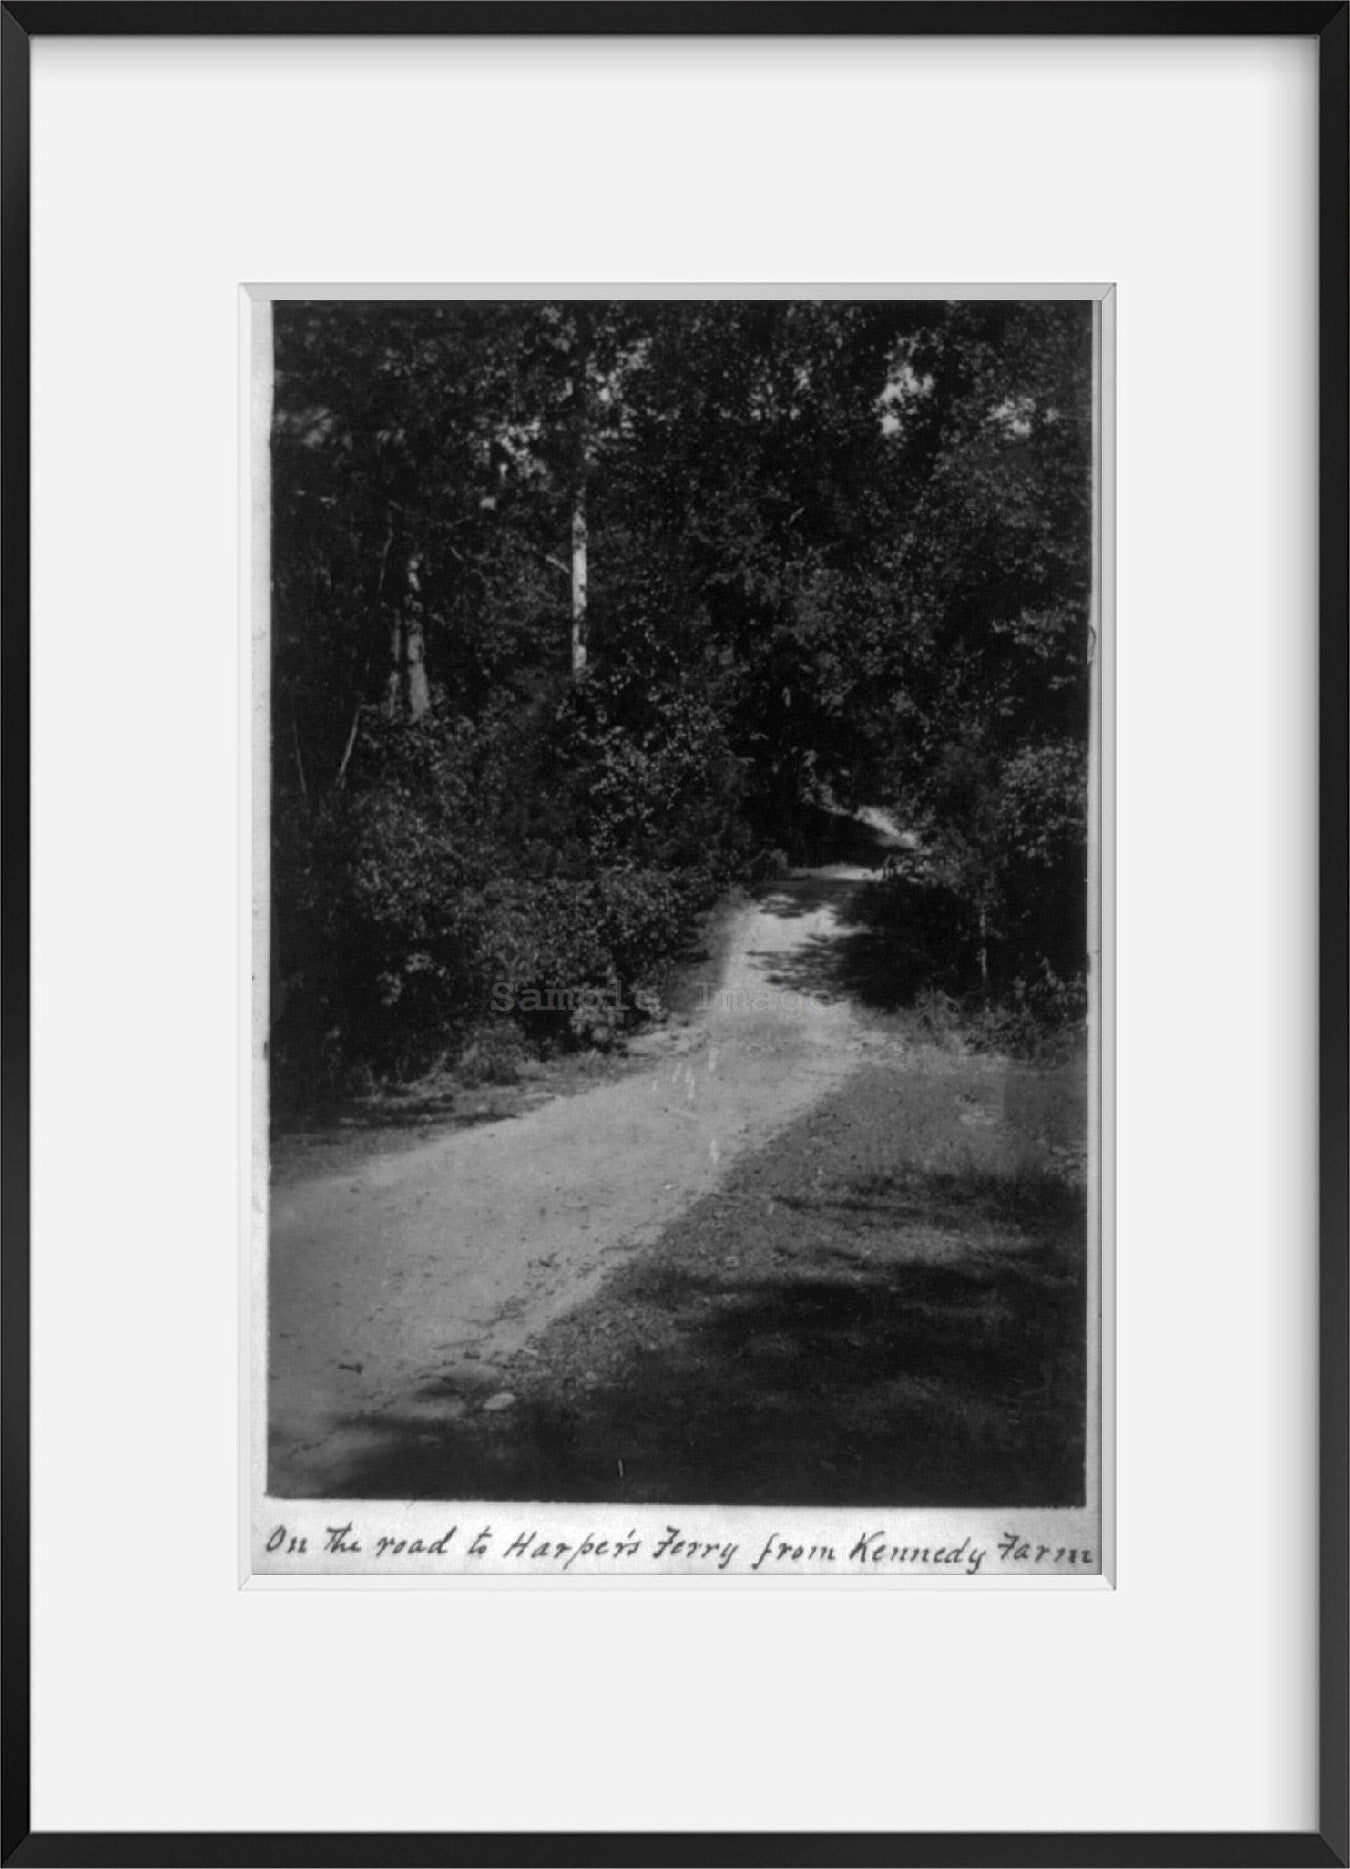 Photograph of On the road to Harper's Ferry from the Kennedy farm